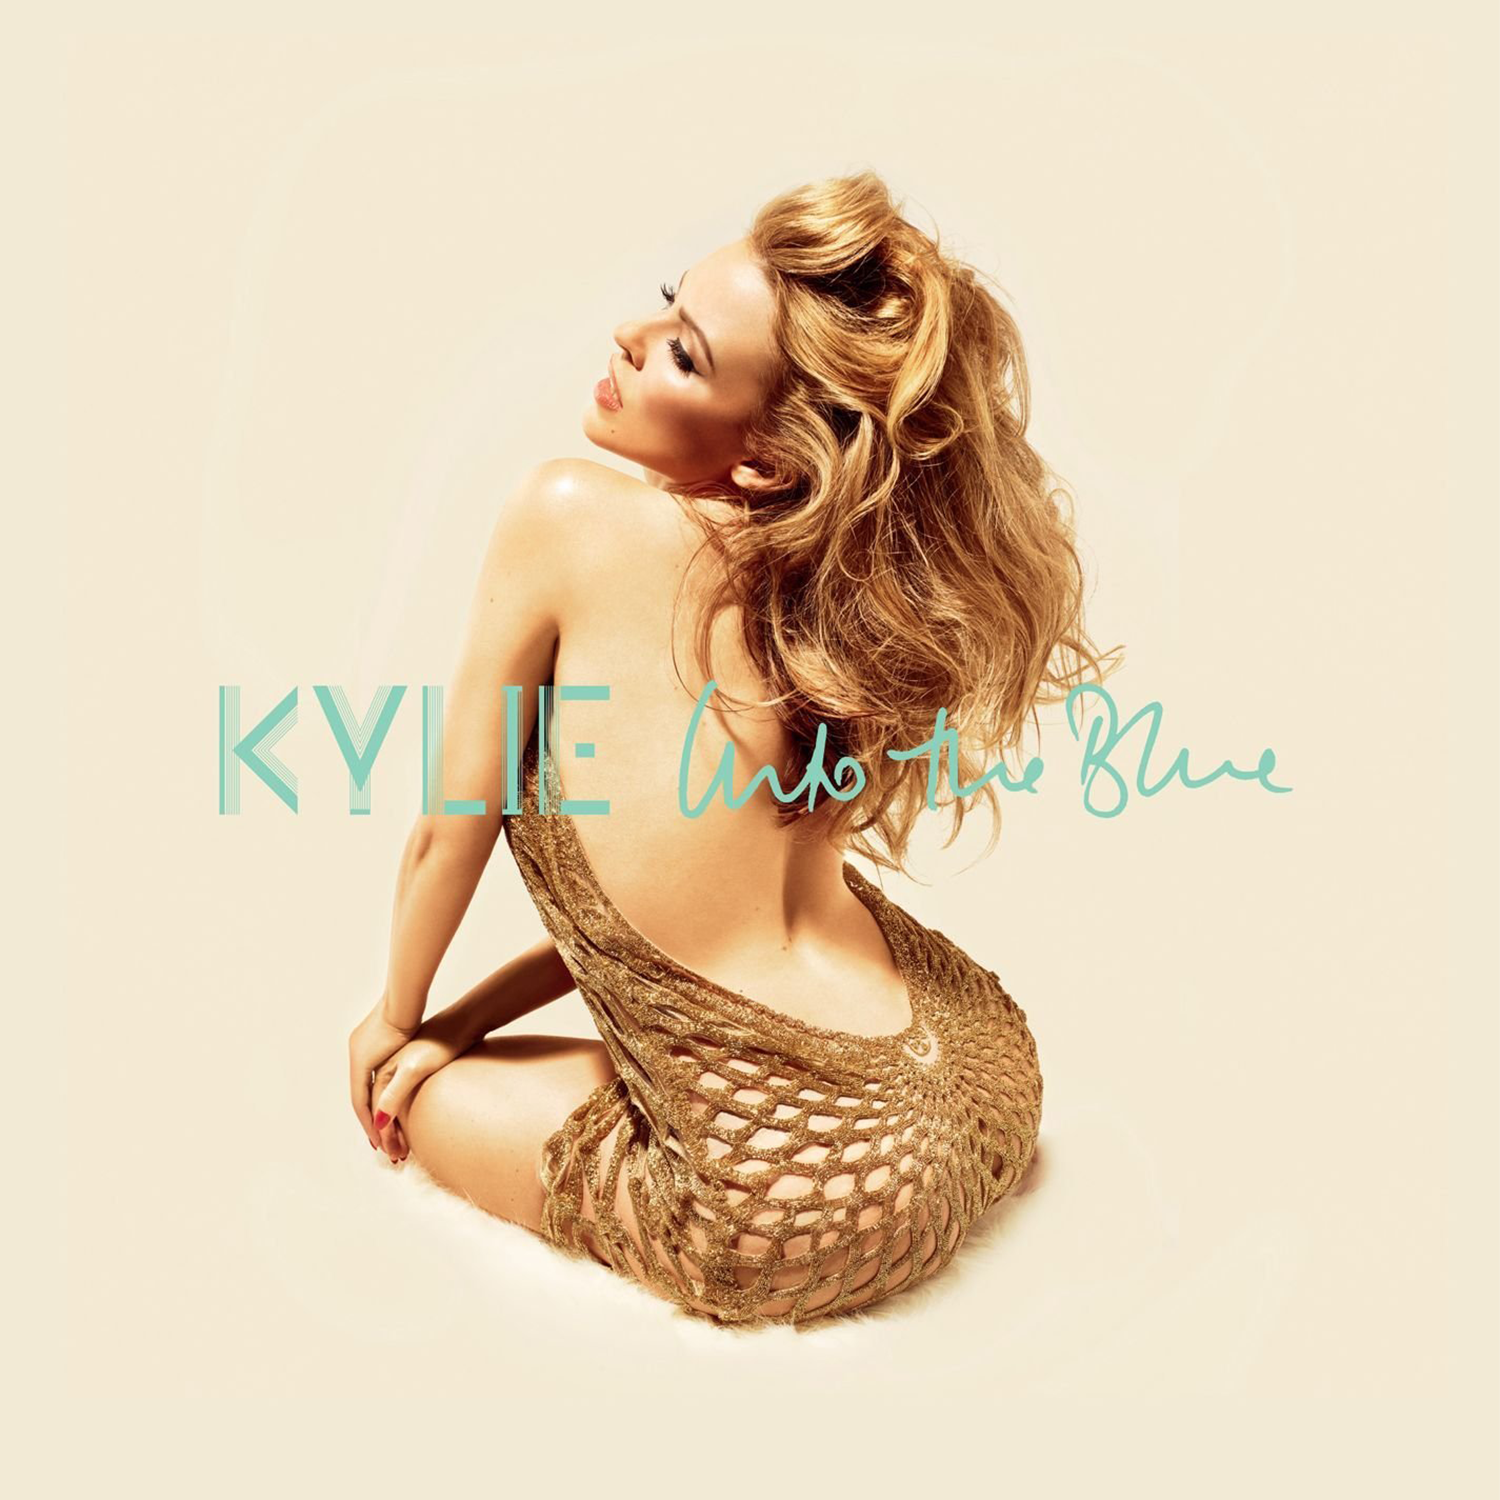 News Added Jan 11, 2014 KYLIE IS BACK ON THE DANCEFLOOR! HER BRAND NEW SINGLE “INTO THE BLUE” WILL BE RELEASED ON 16TH MARCH 2014 NEW STUDIO ALBUM COMING LATER THIS YEAR “Into The Blue” will be the first track taken from Kylie’s highly anticipated new album to be released later this year. The song, […]